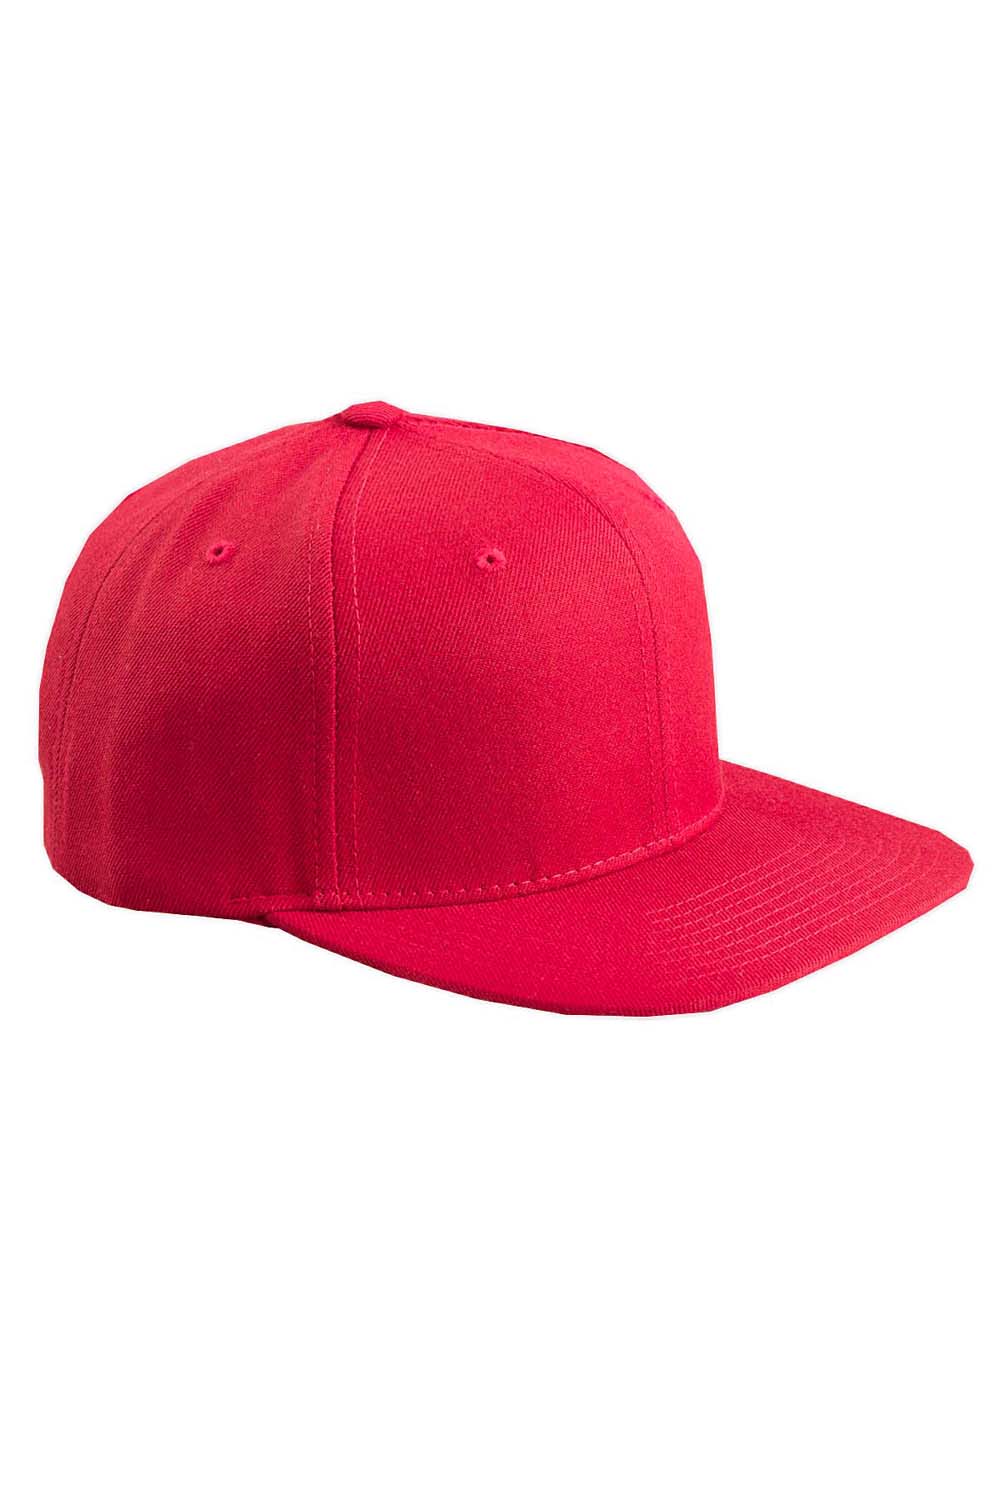 Yupoong 6089 Mens Adjustable Hat Red Front